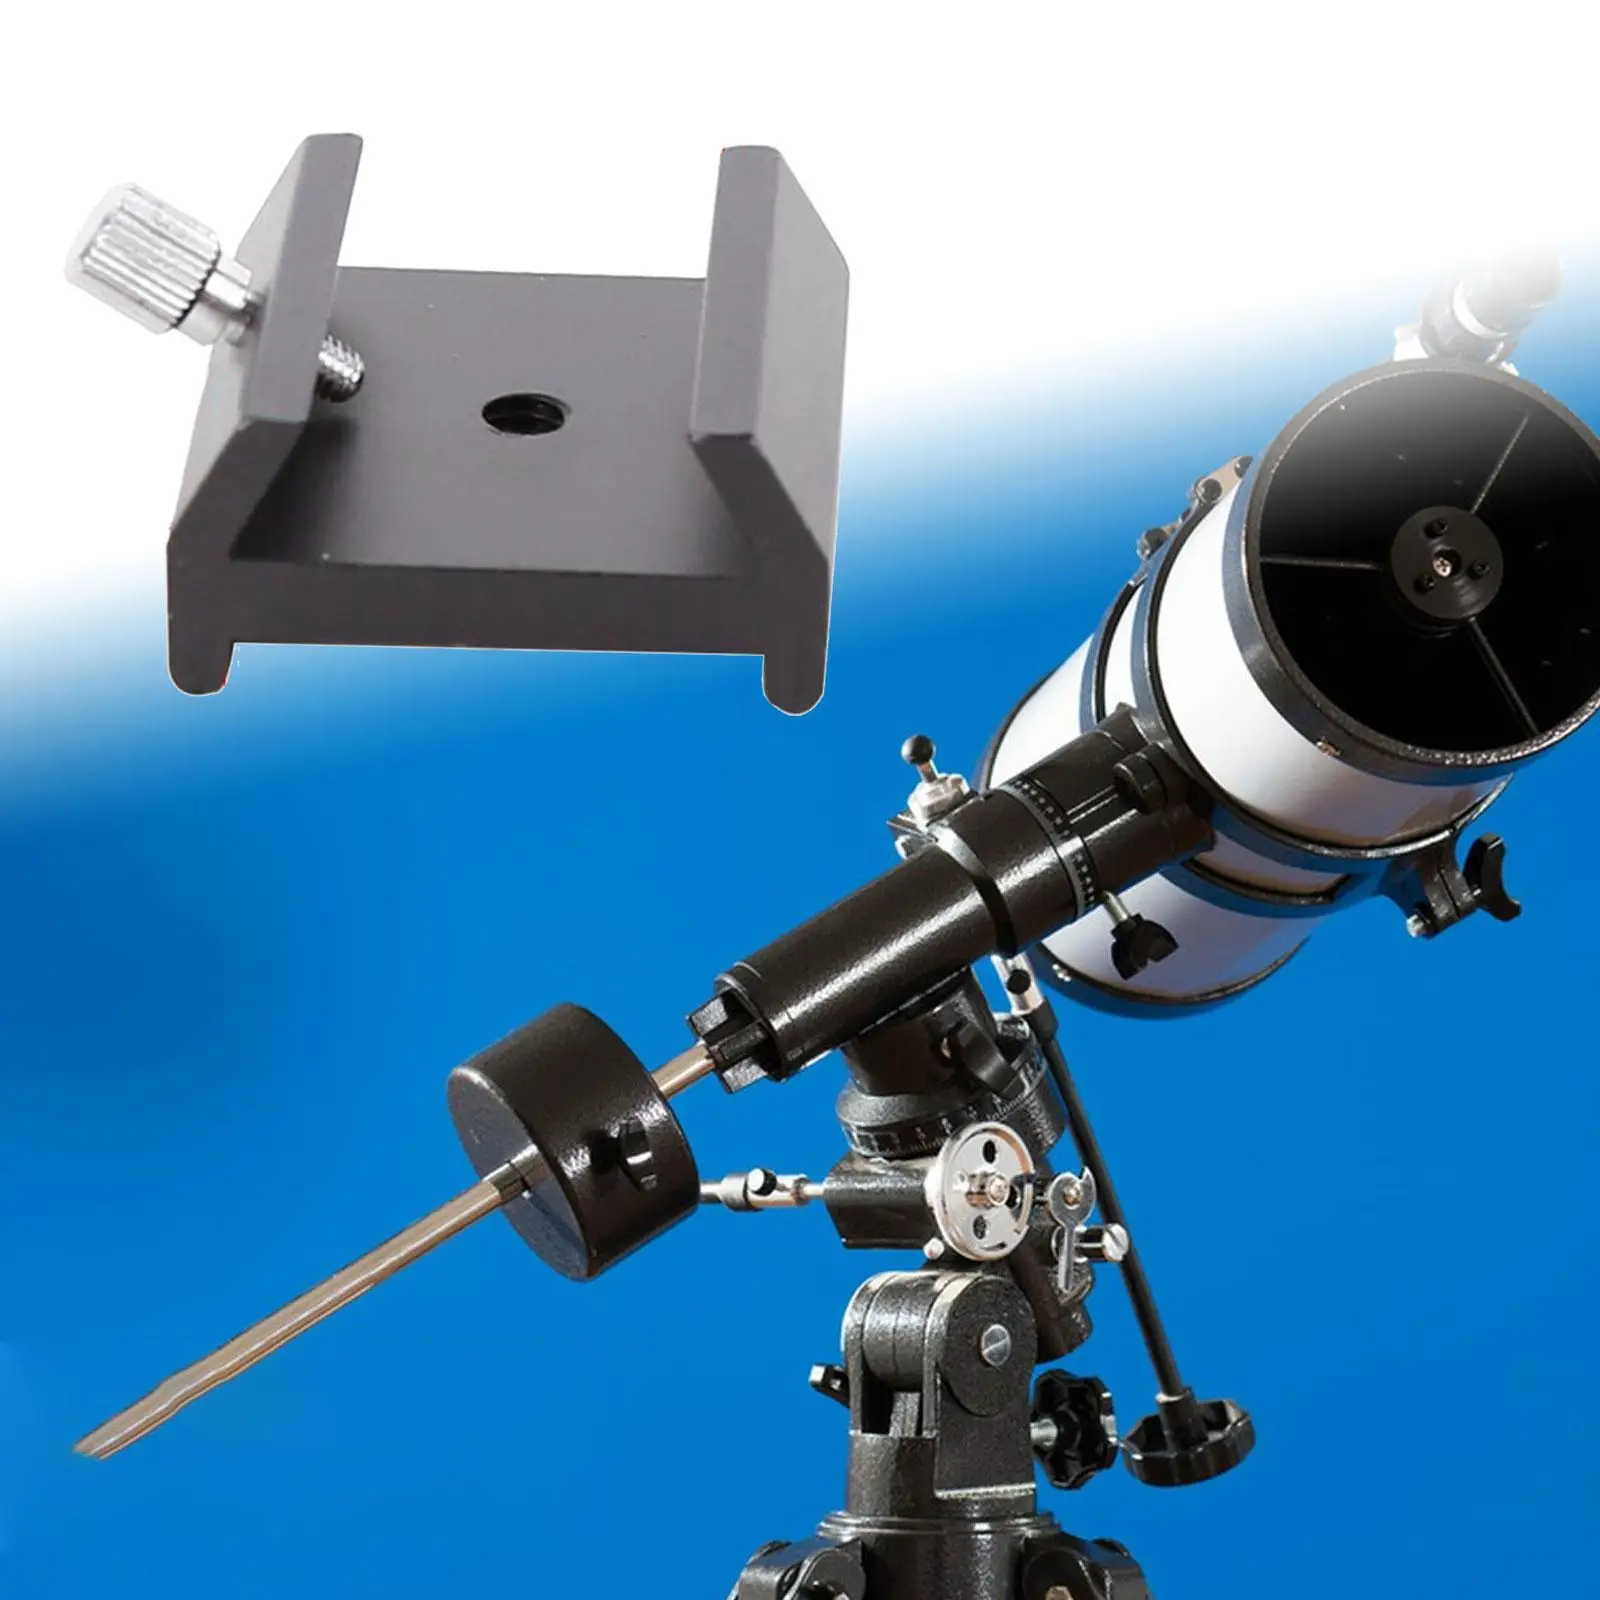 Scope Mount, Slotted Plate, Stable Adapter, Easy Installation Of Telescope